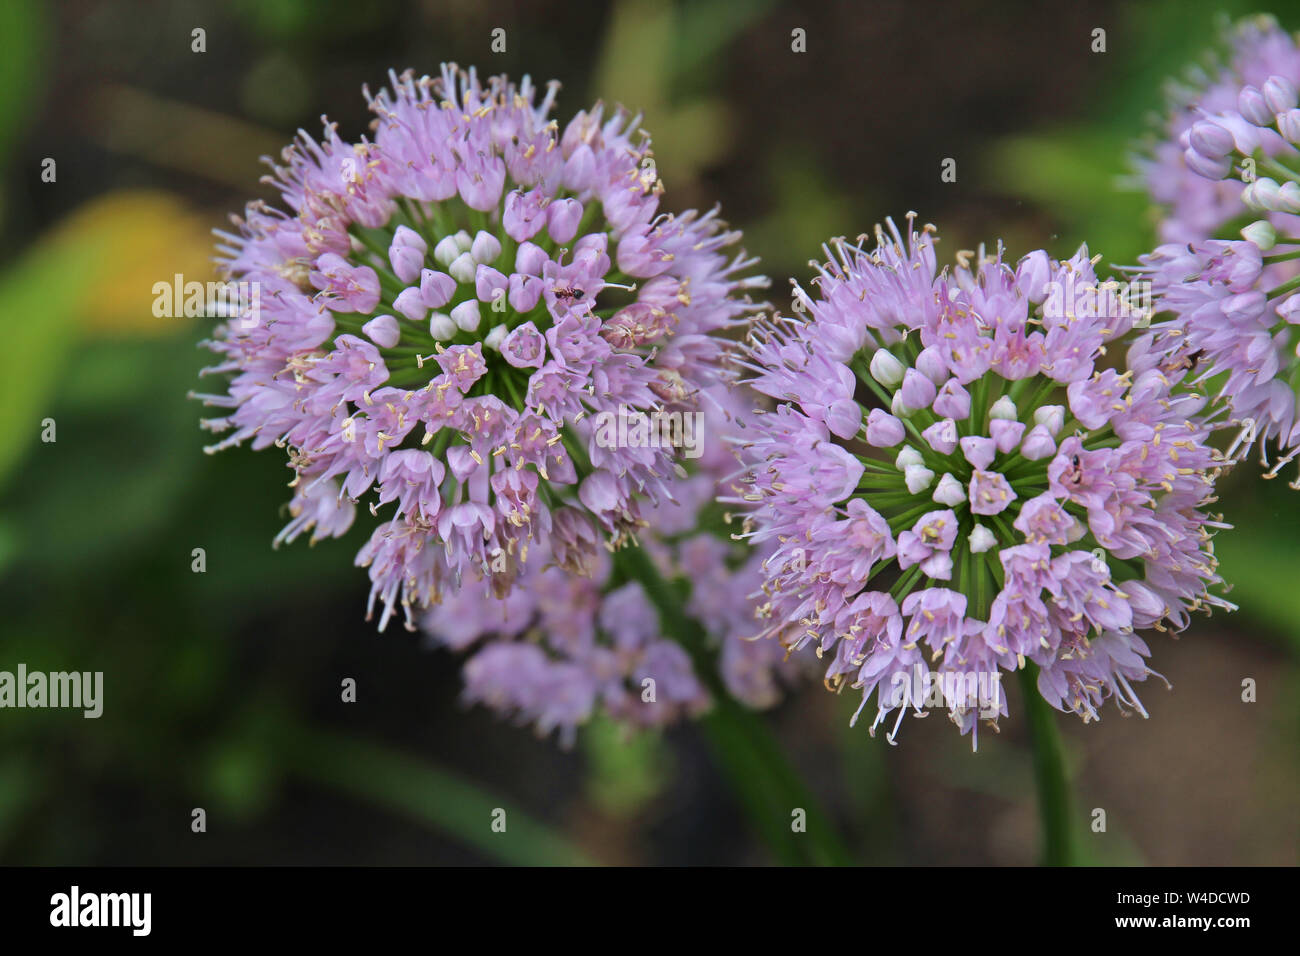 Close up of Pink Moon Allium flowers  with an ant crawling on the flowers using soft focus and a blurred background Stock Photo